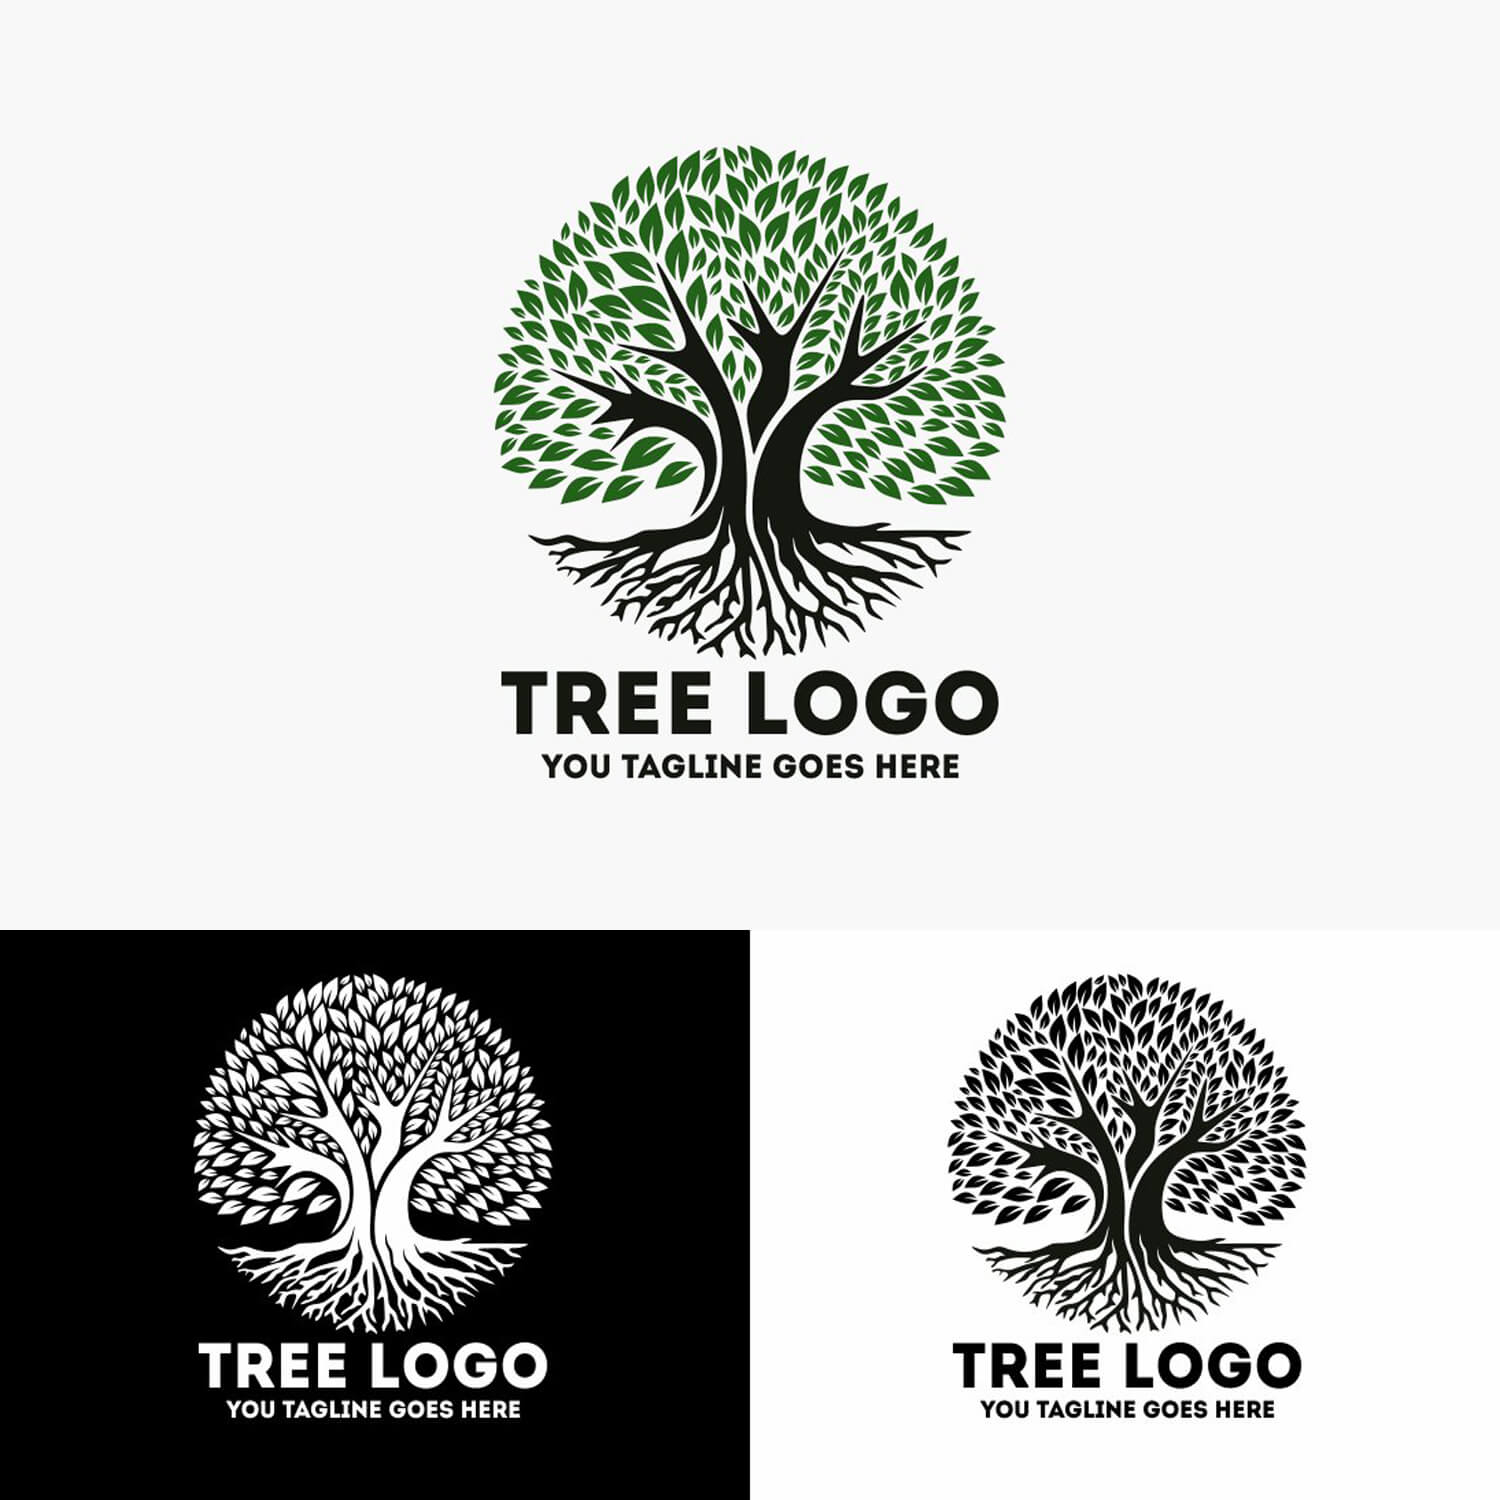 The logo of a large tree, the crown and root system of which forms a circle.